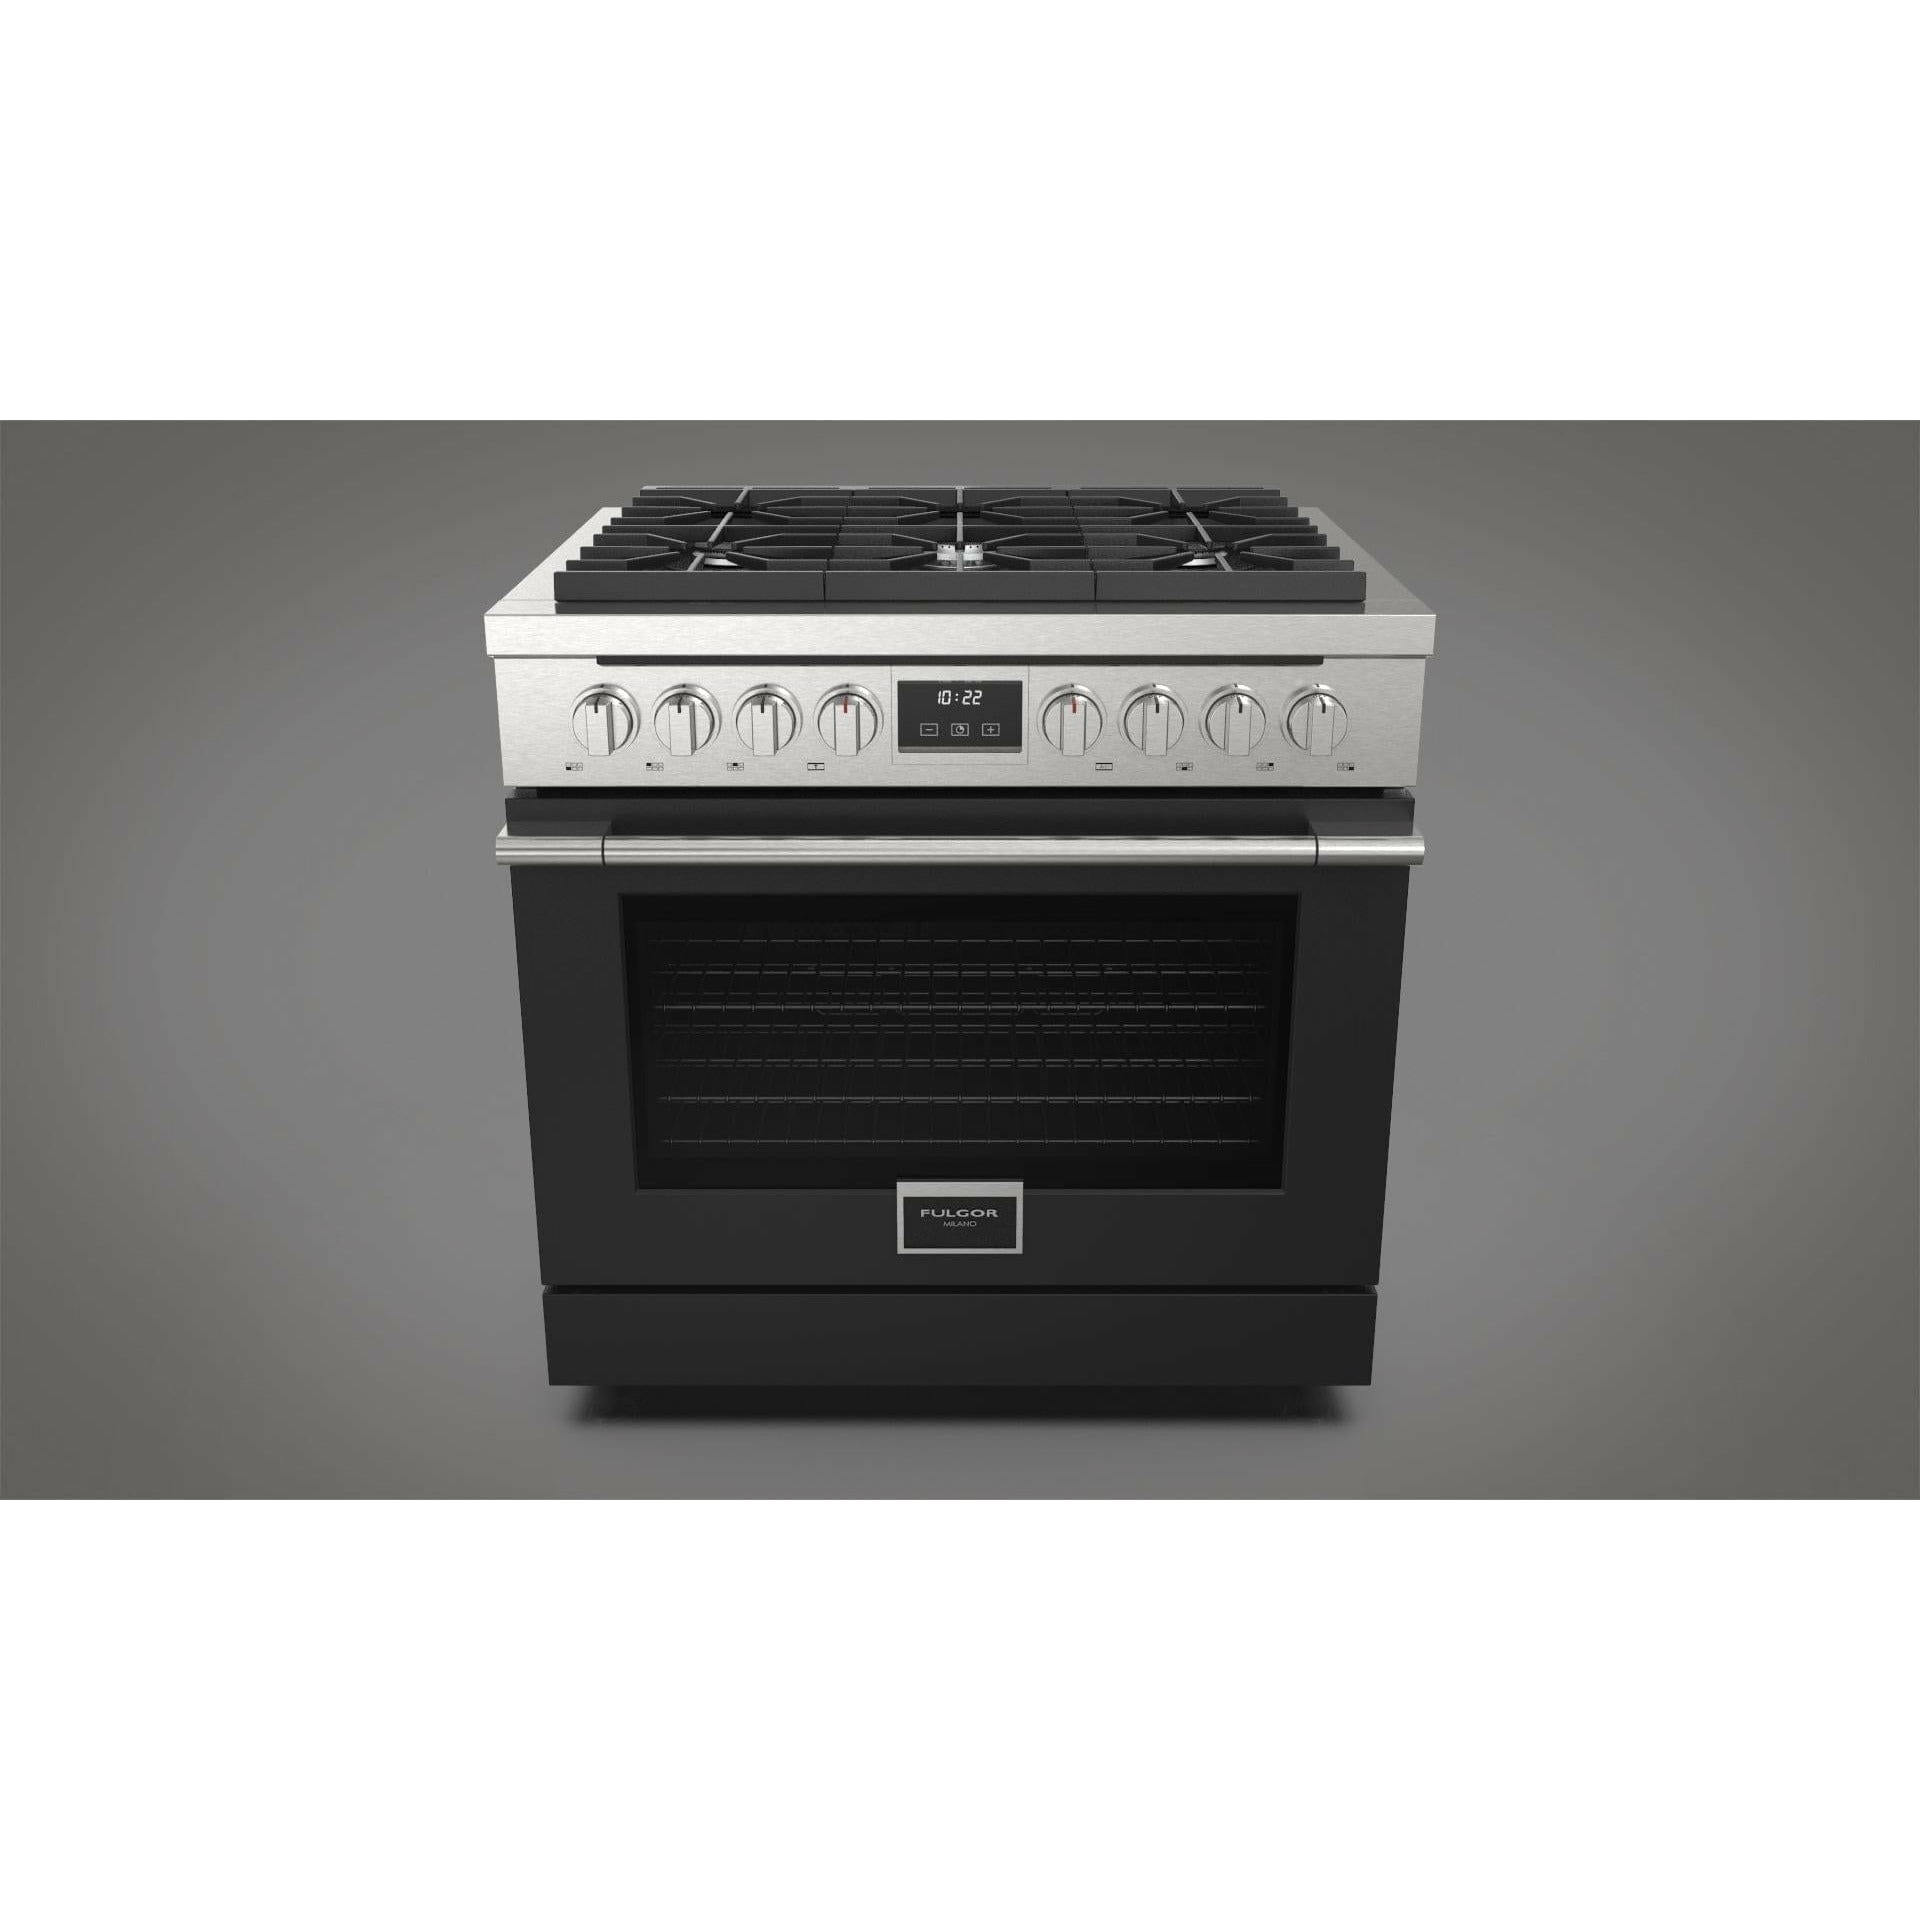 Fulgor Milano 36" Freestanding All Gas Range with 3 Duel Flame Burners, Stainless Steel - F4PGR366S2 Ranges ACDKIT36MB Luxury Appliances Direct